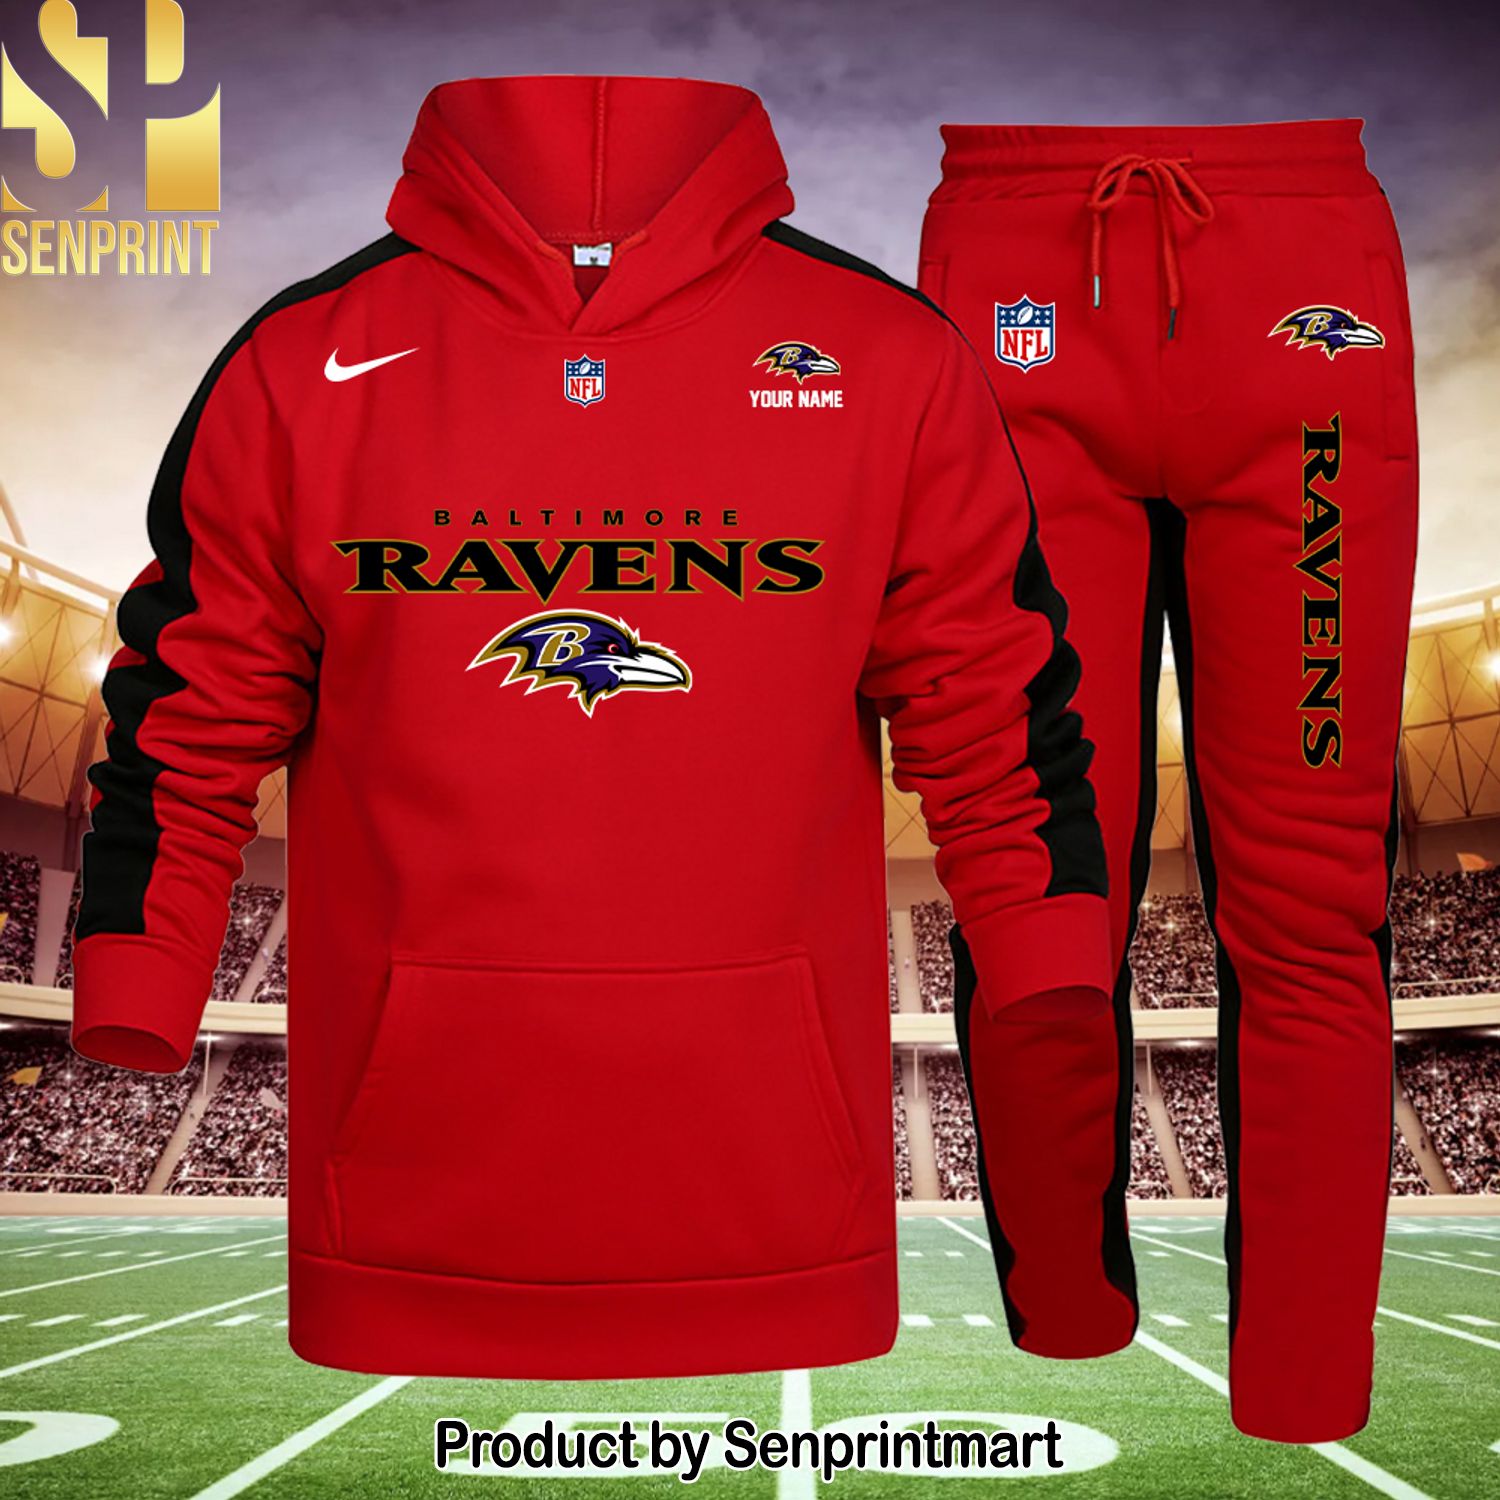 Baltimore Ravens All Over Printed 3D Shirt and Pants